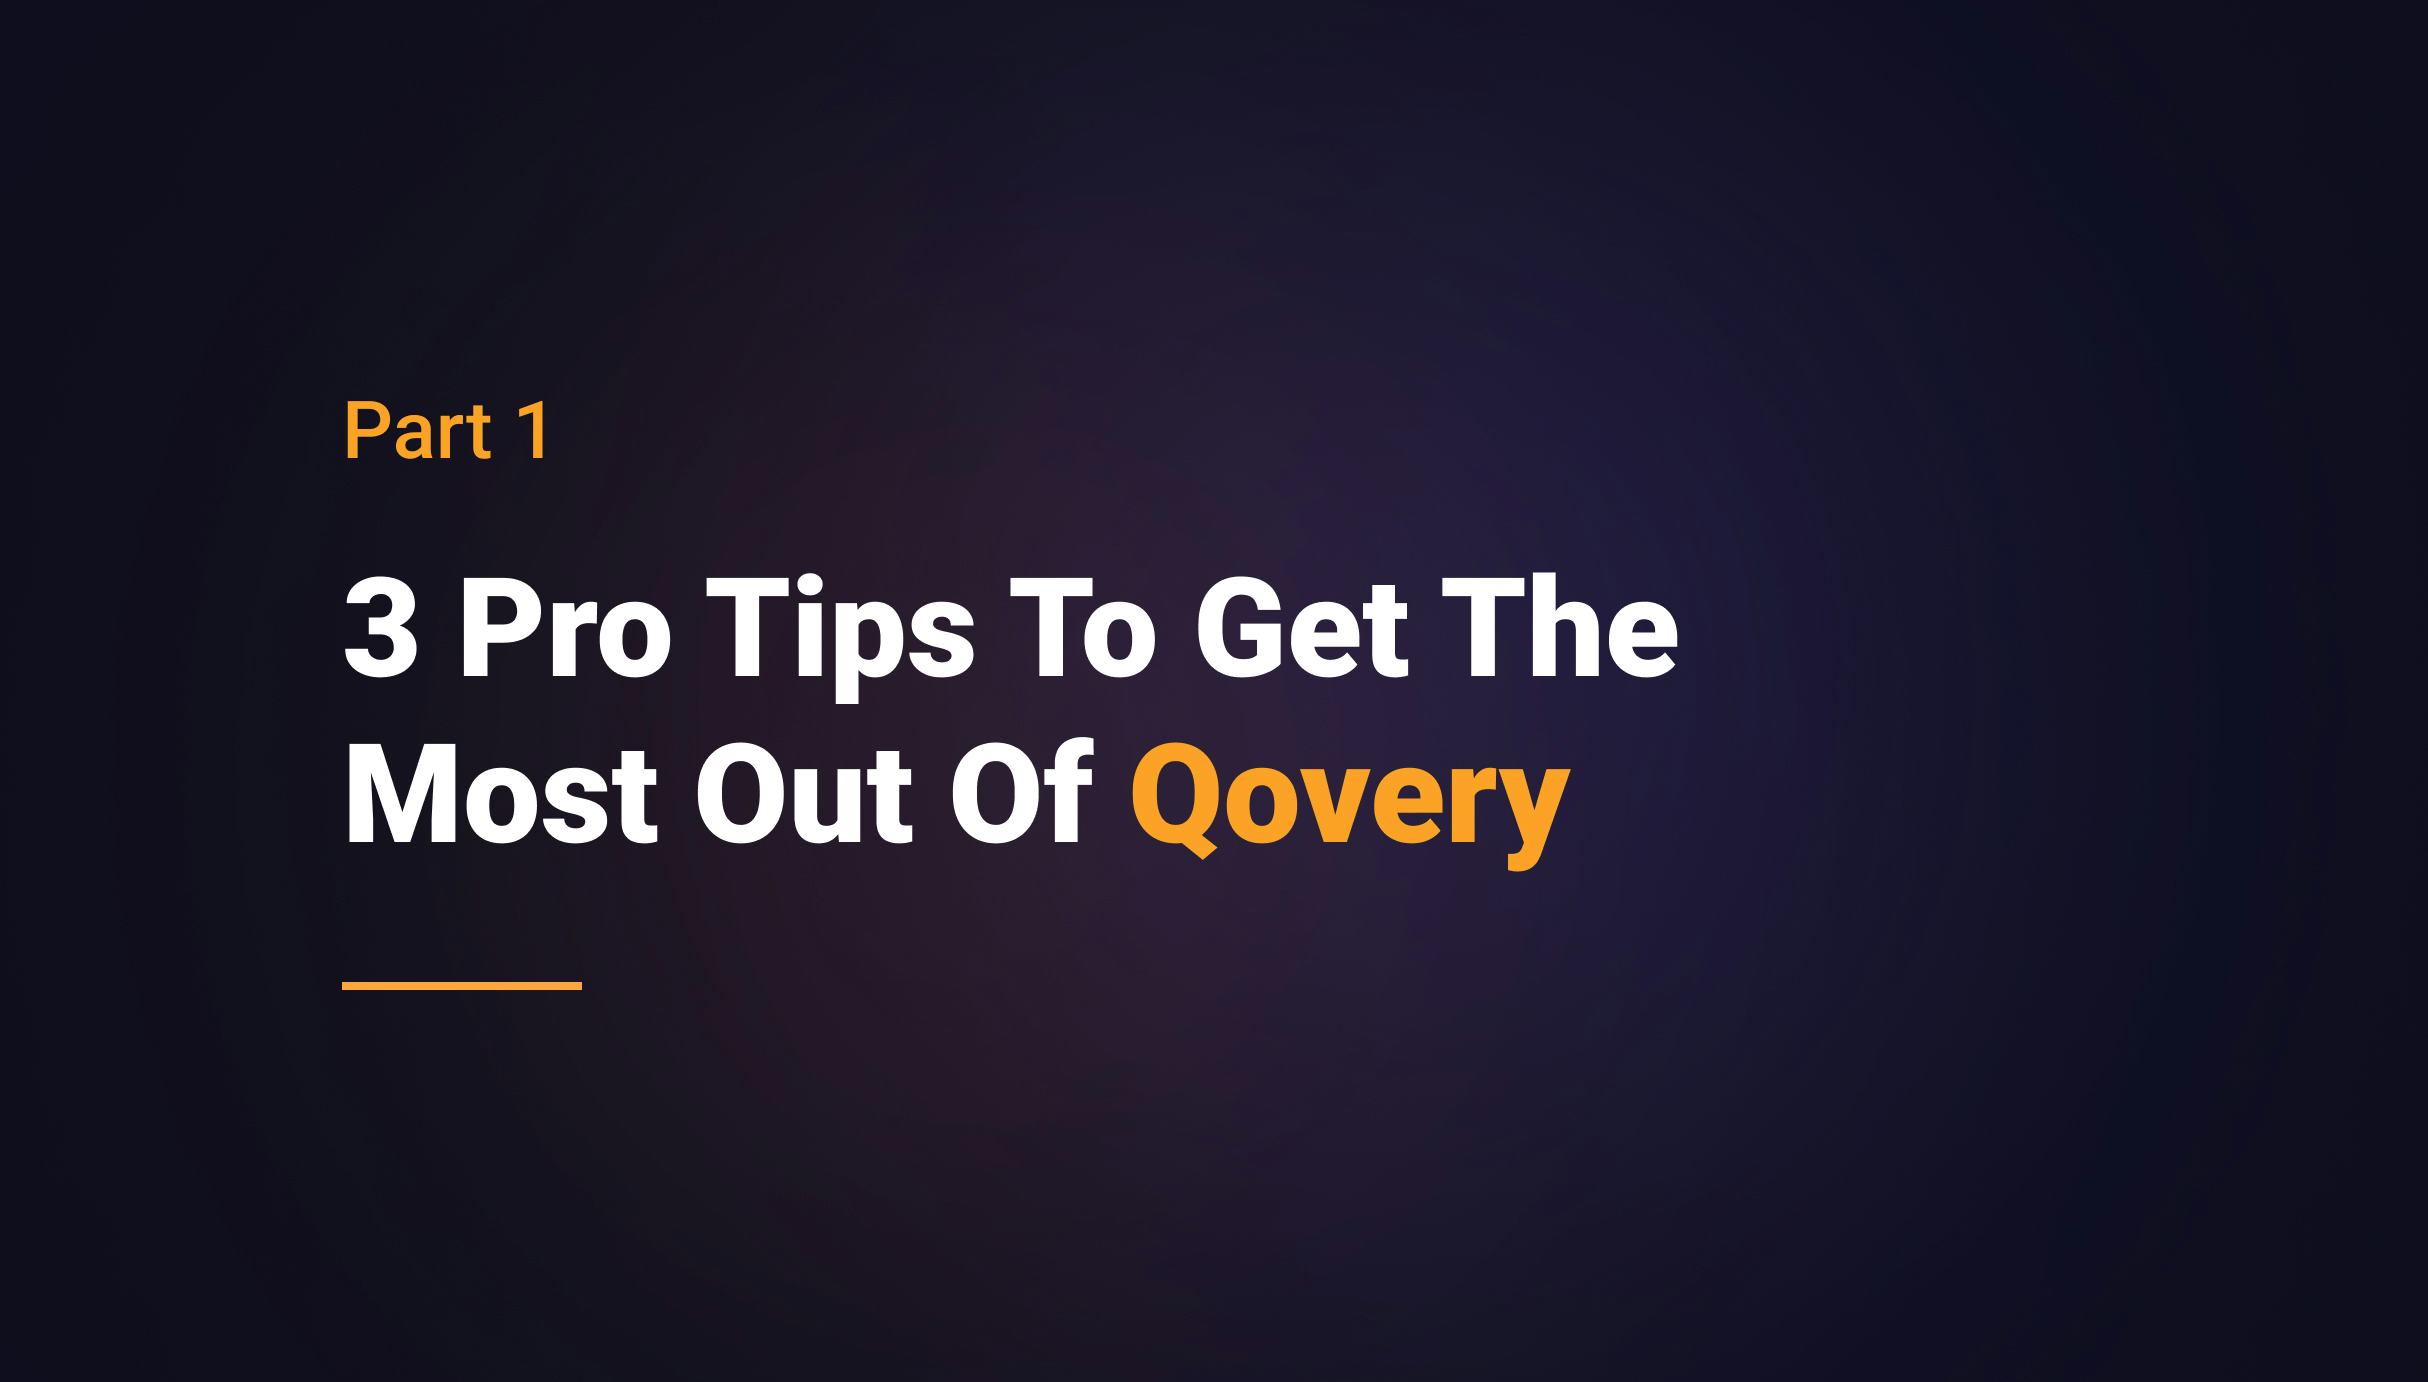 3 Pro Tips To Get The Most Out Of Qovery - Part 1